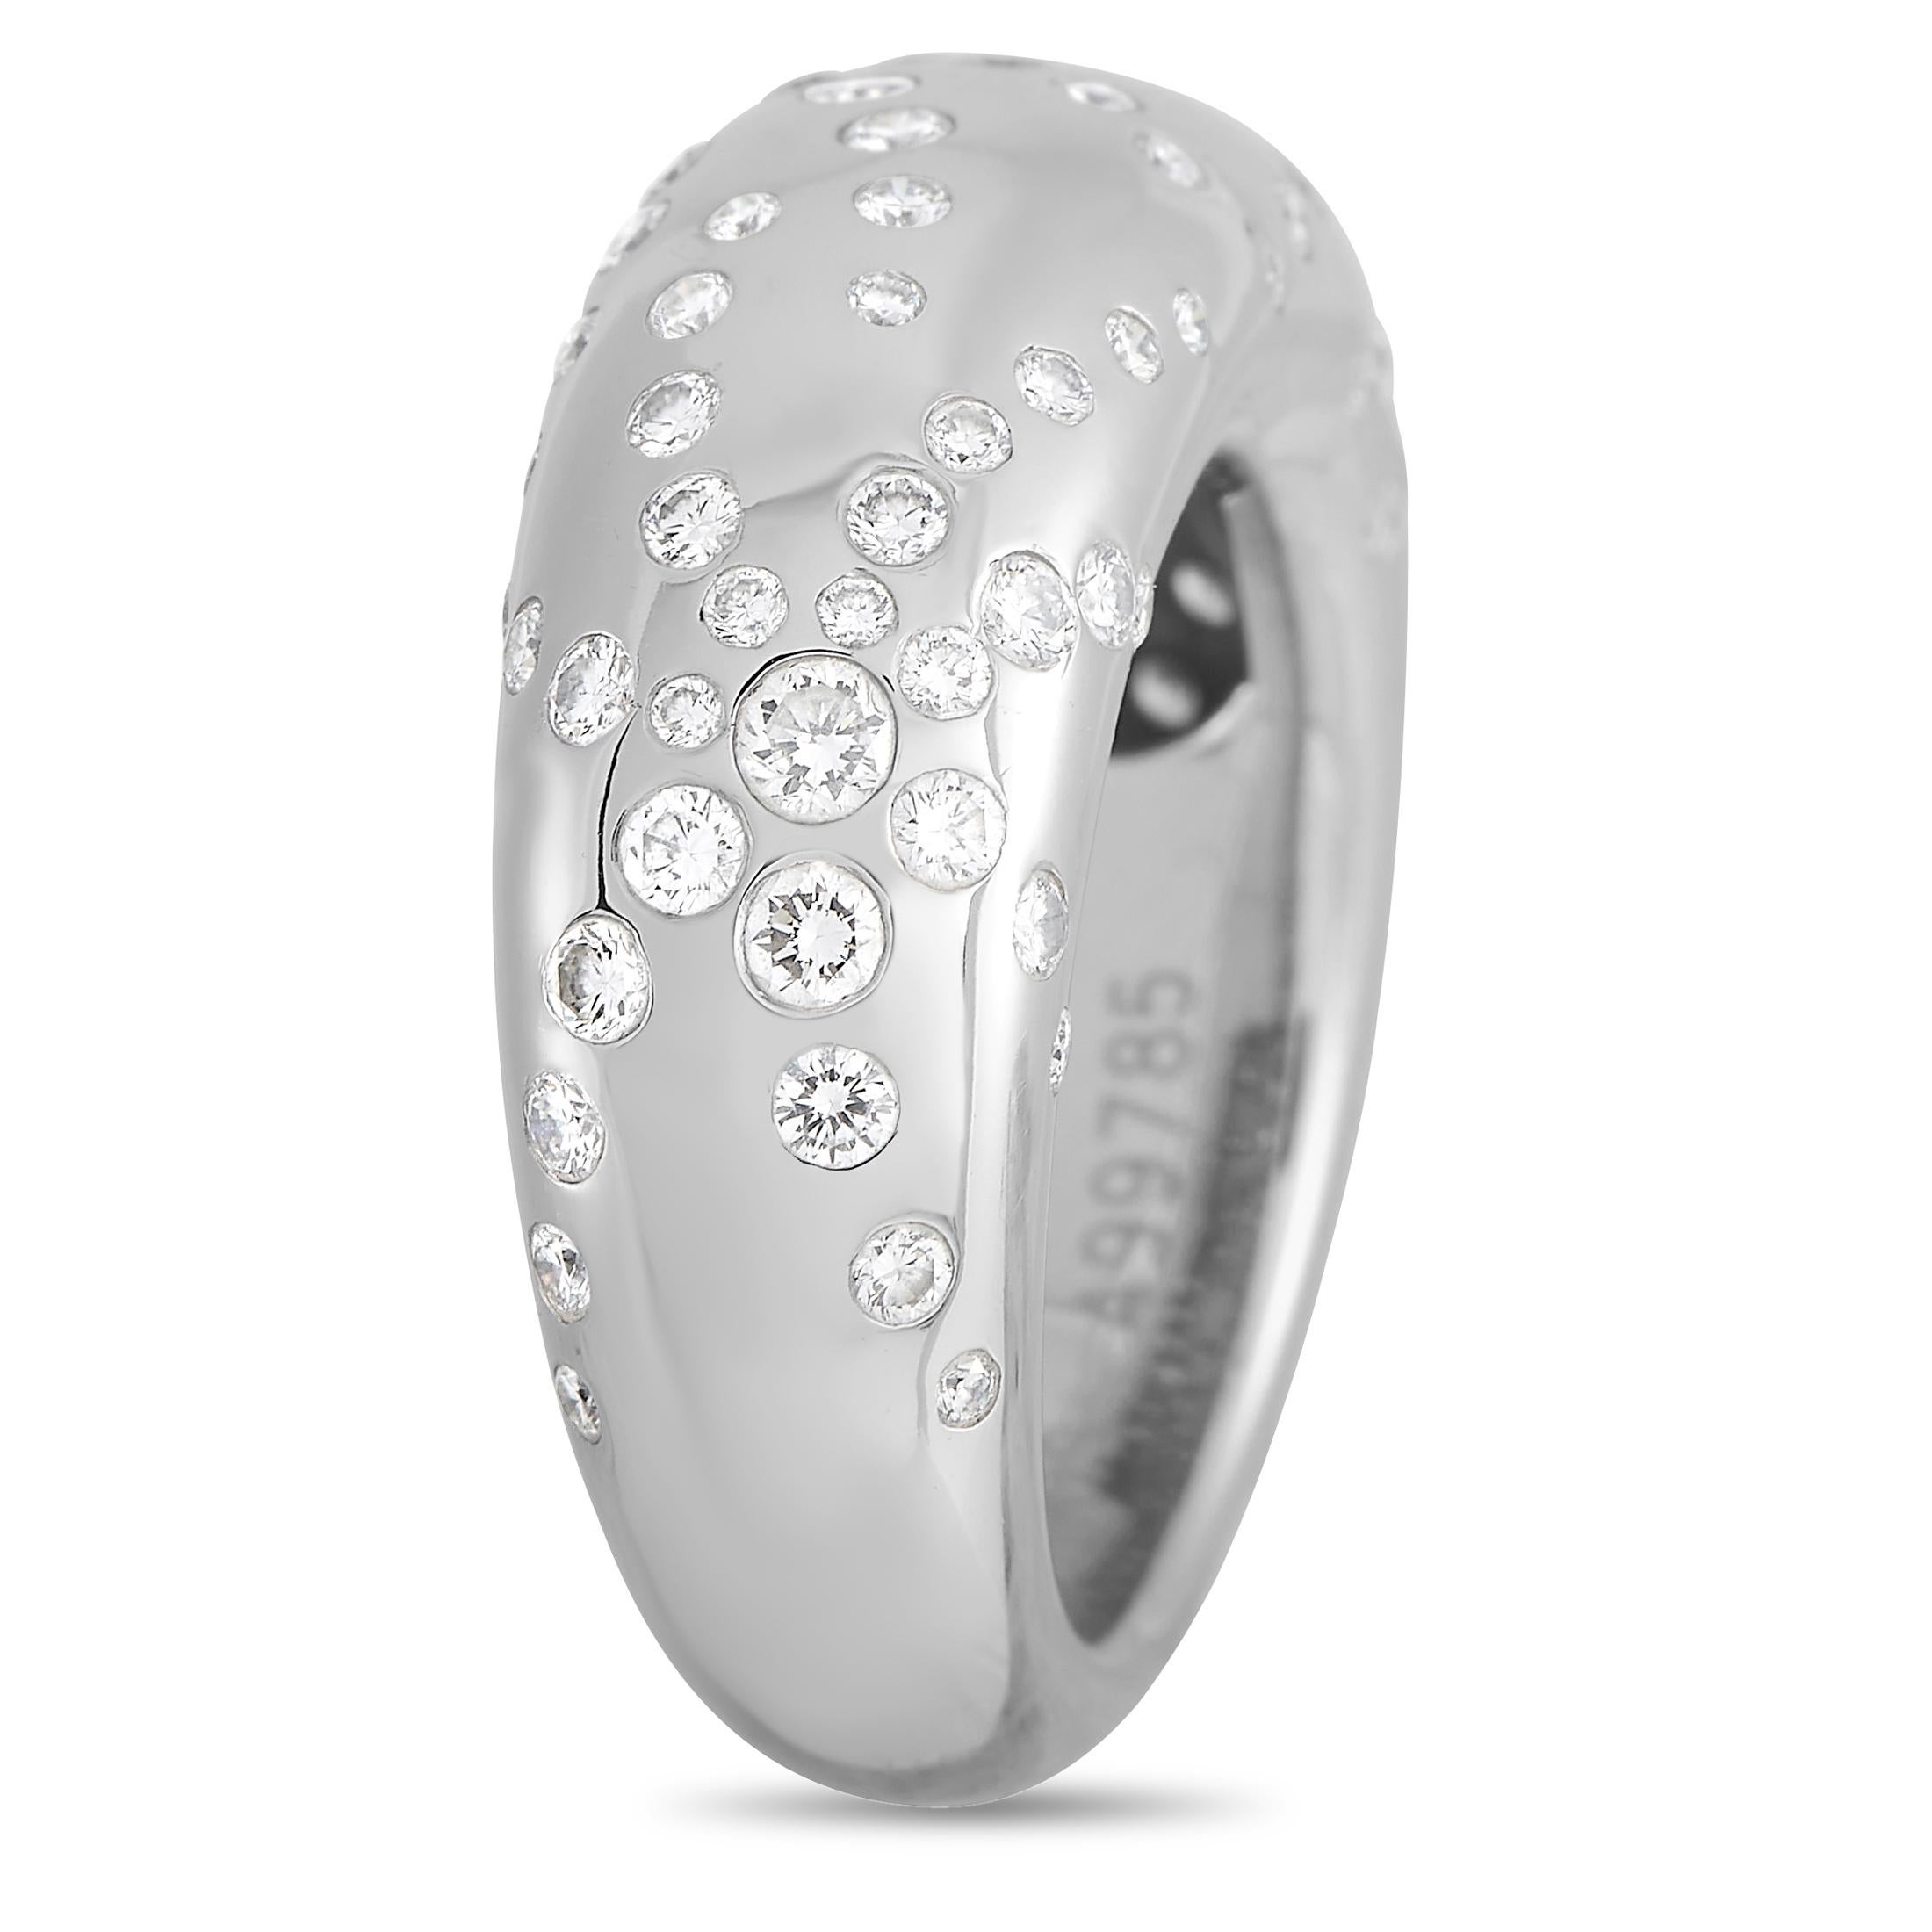 Glittering diamonds totaling 0.65 carats add sparkle and shine to this sleek, simple Chaumet band ring. Crafted from shimmering 18K White Gold, it features a band width and top height measuring 5mm. 
 
 This jewelry piece is offered in estate